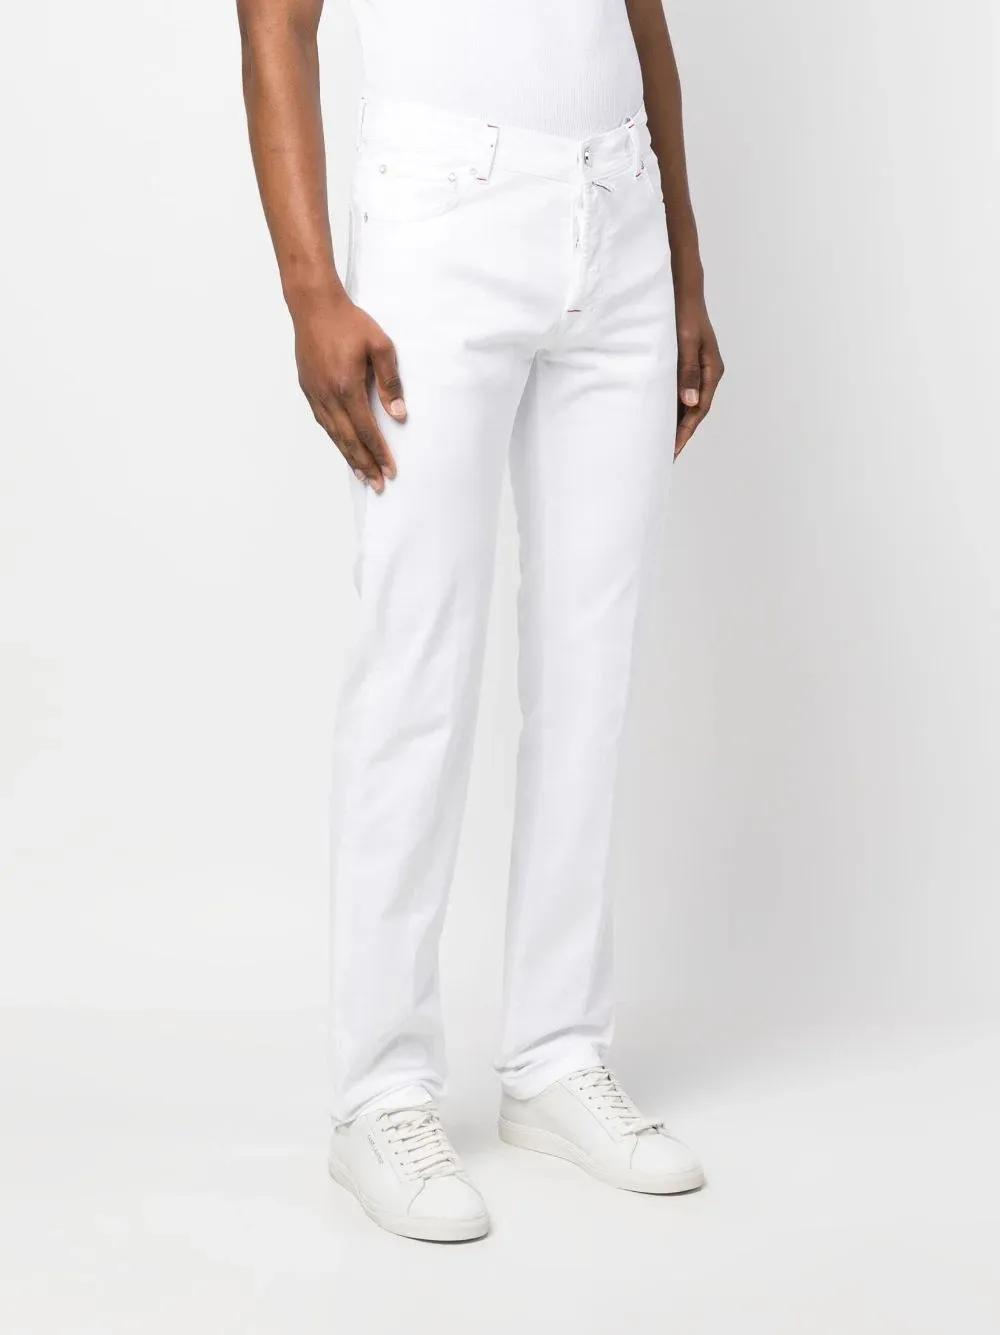 Jeans Mens Designer Kiton Mid-Rise Straight-Ben Jeans Spring Autumn Dressed Long Pants For Man New Style White Denim Trousers